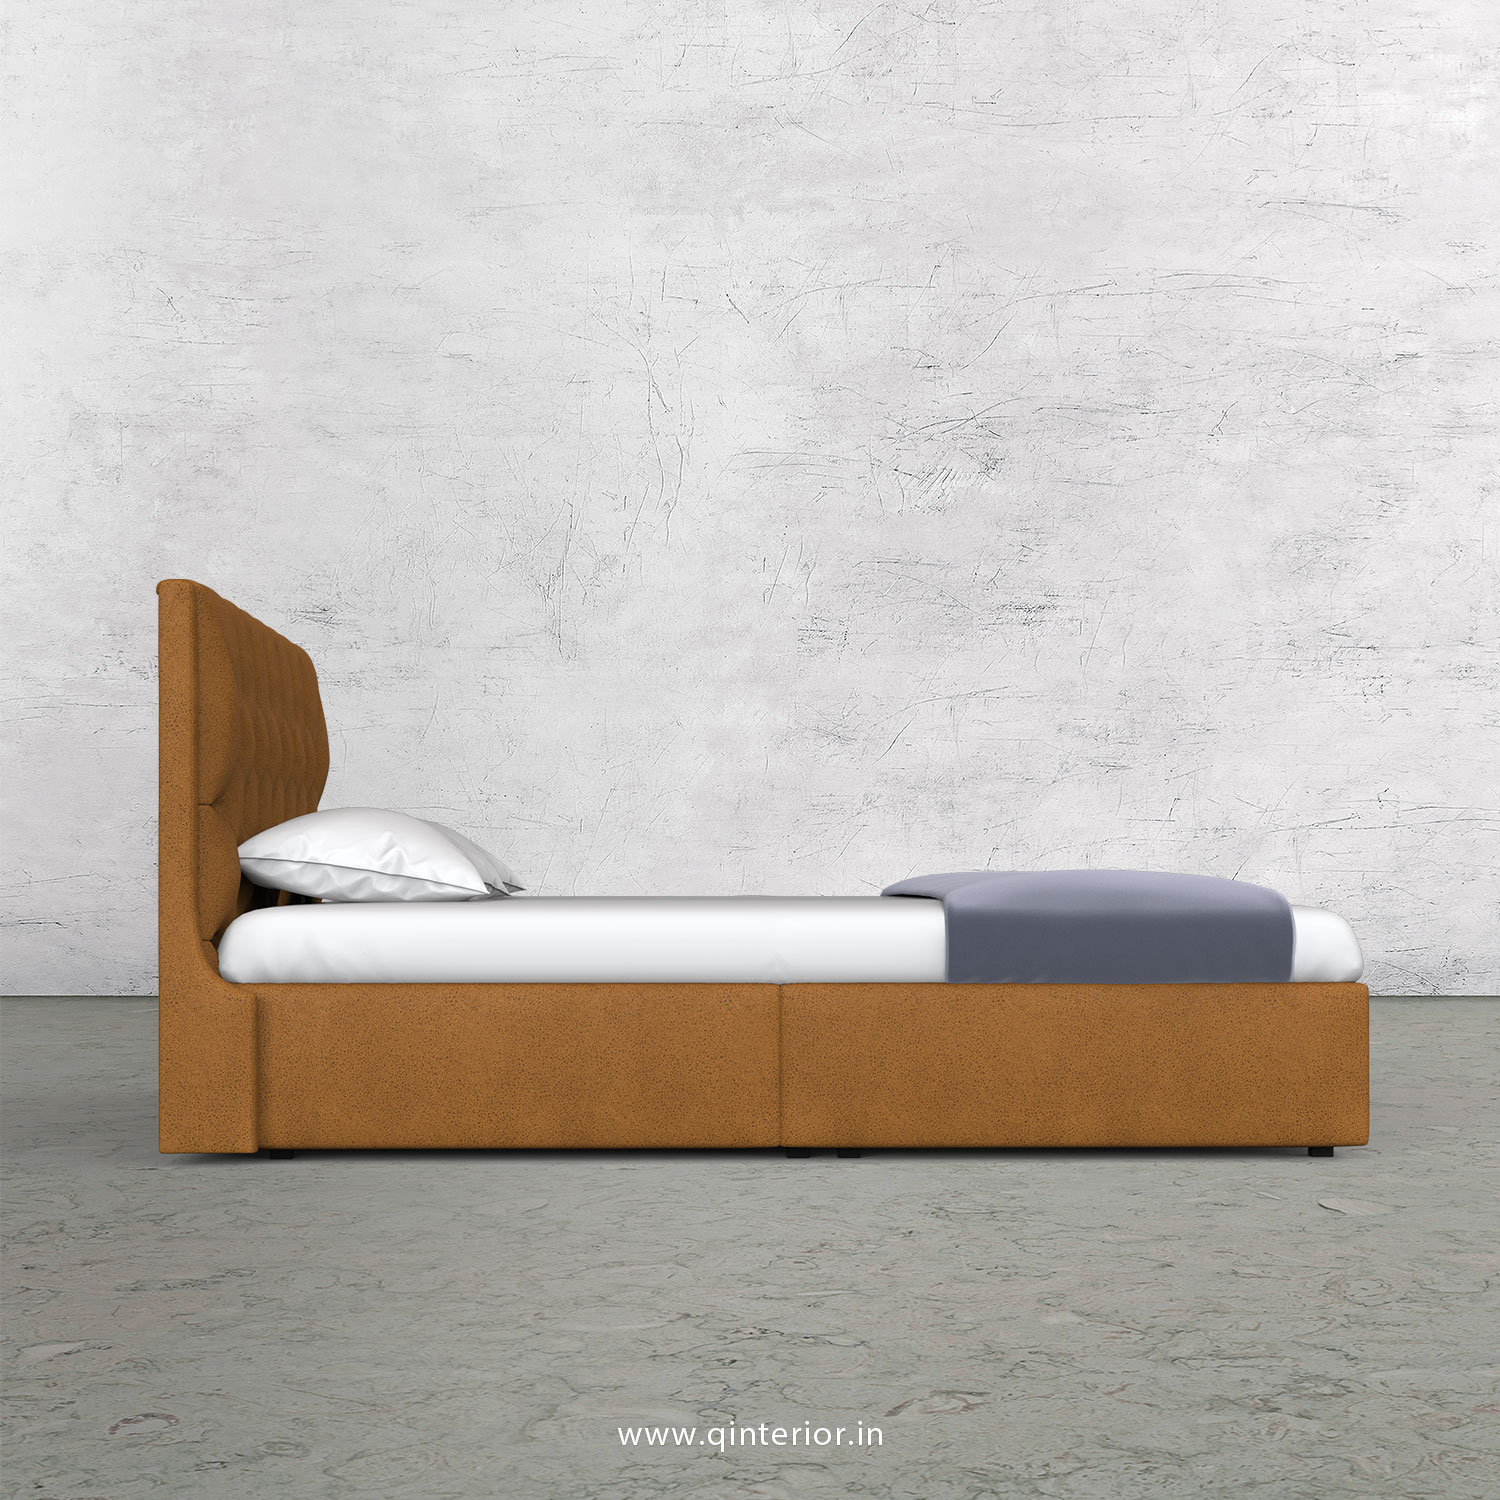 Scorpius King Size Bed in Fab Leather Fabric - KBD009 FL14